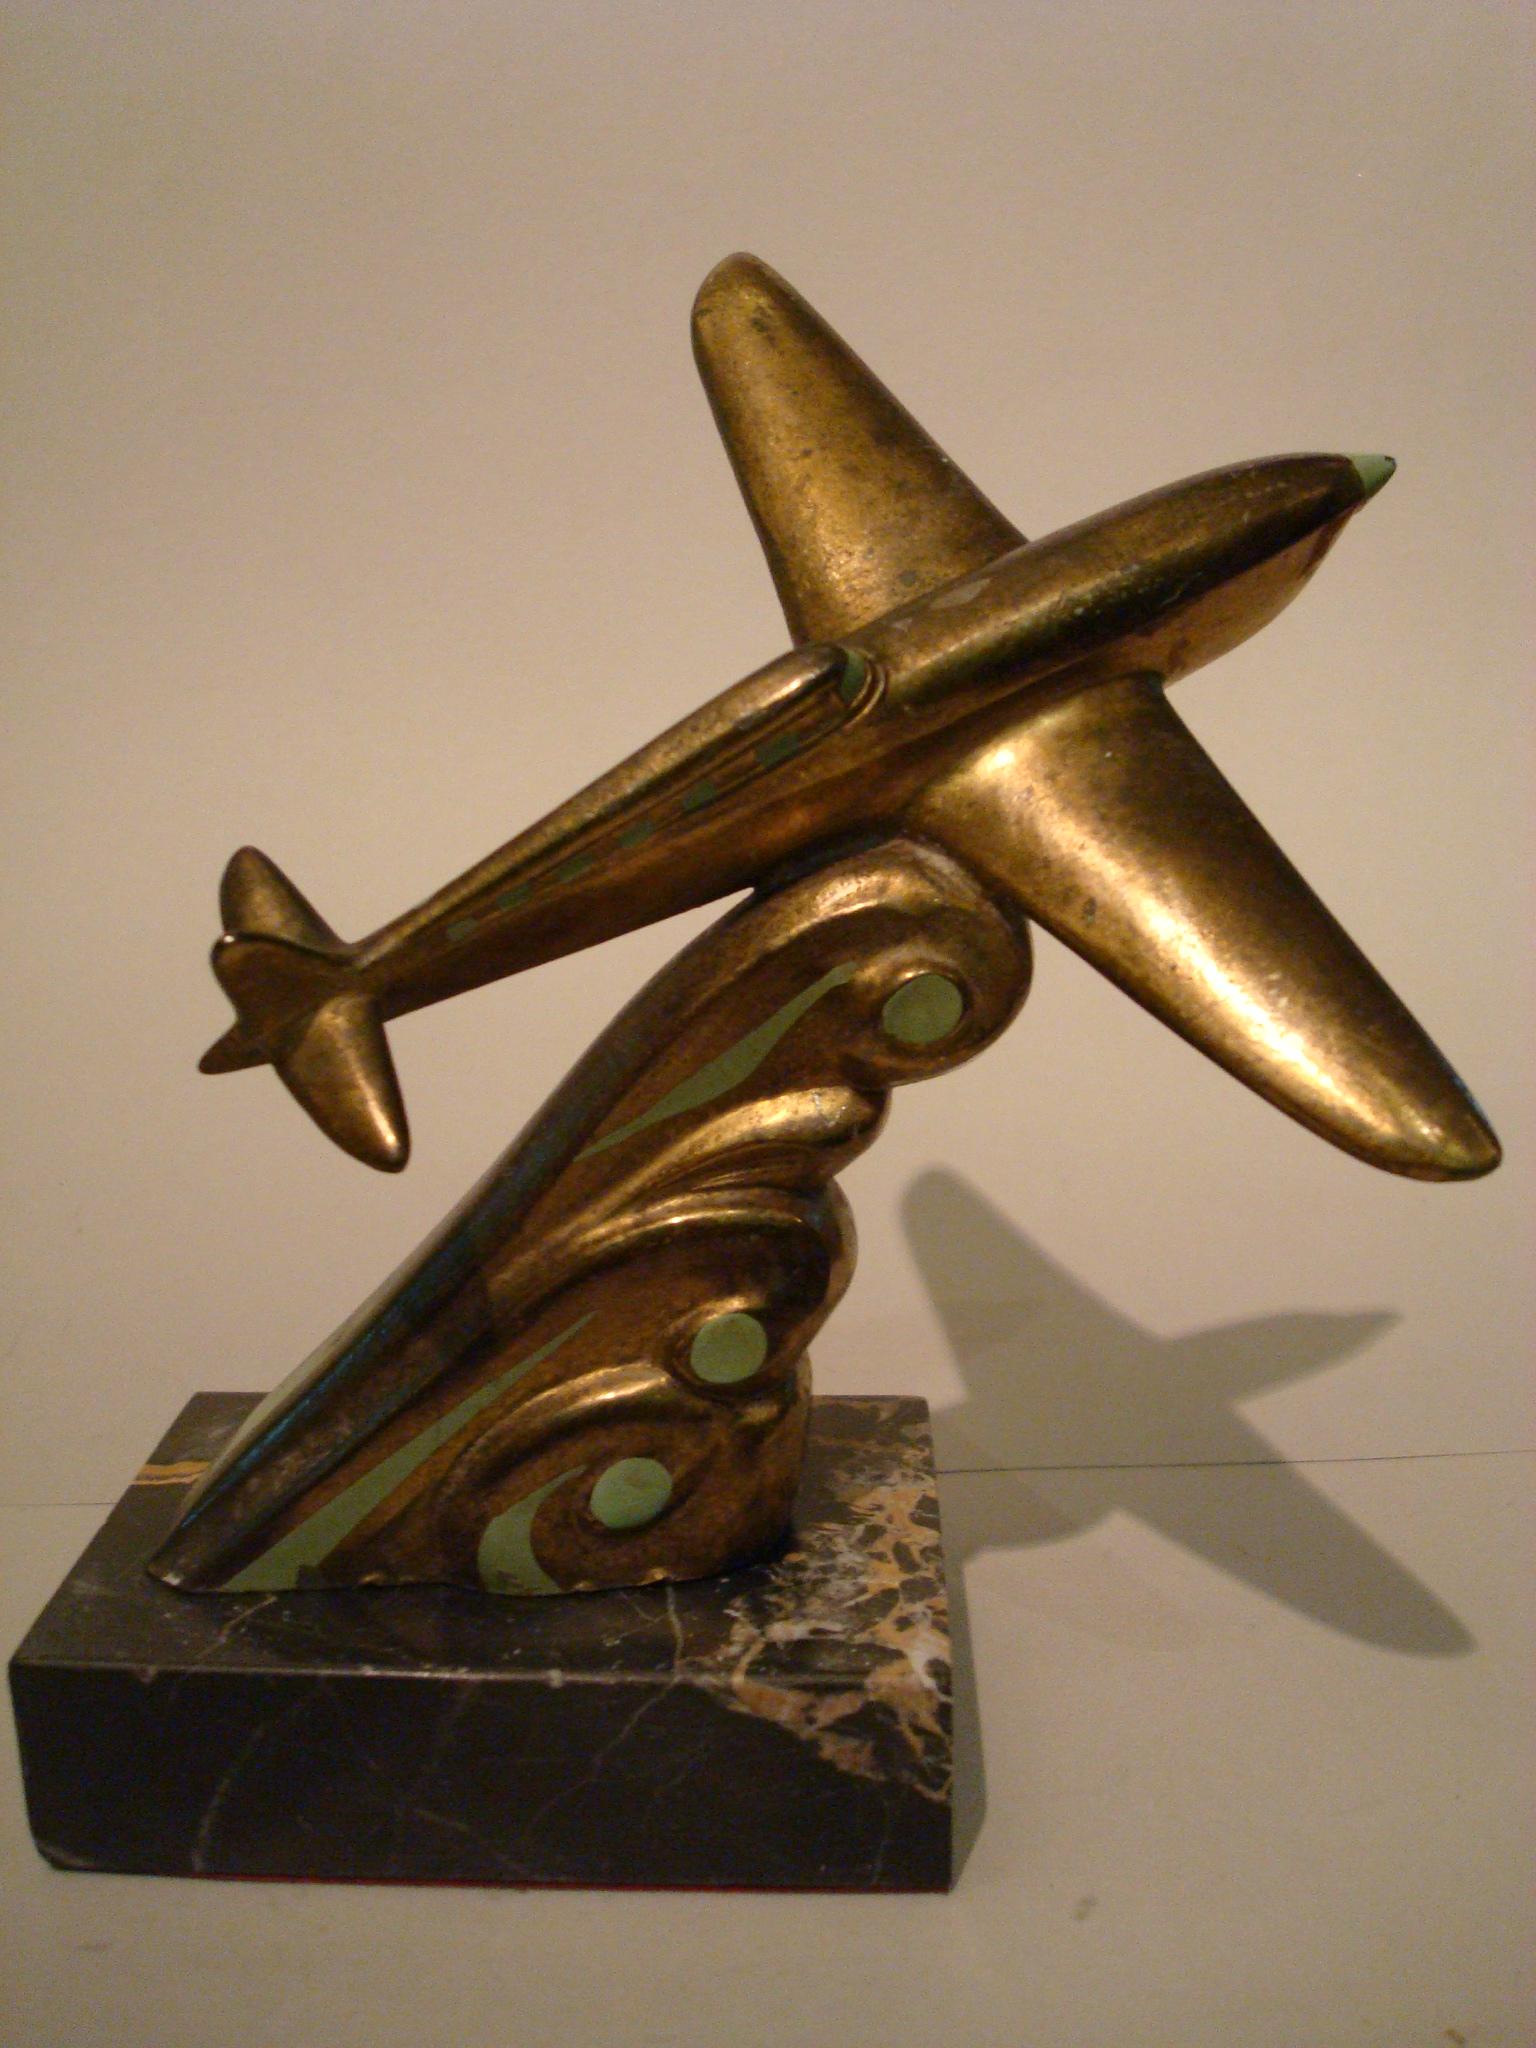 Metal Art Deco French Airplane Desk Paperweight Sculpture